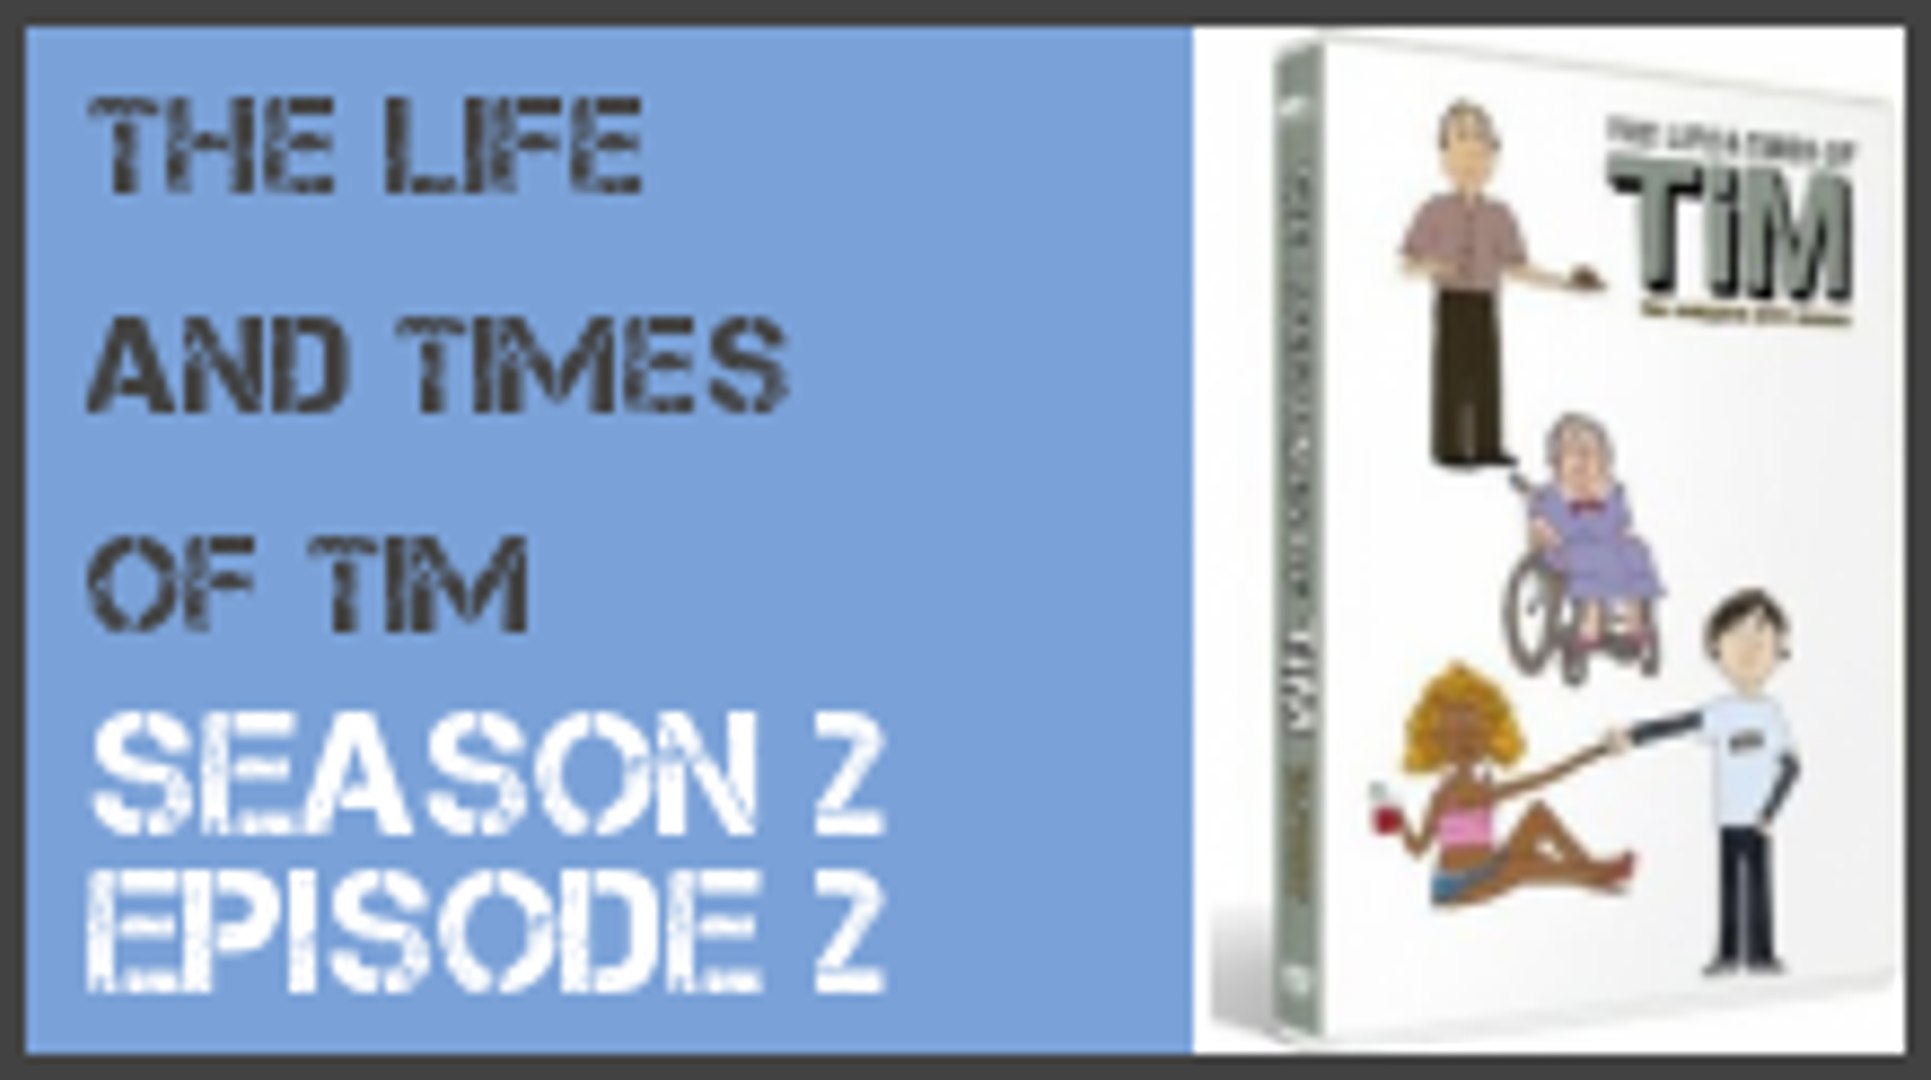 The Life and Times of Tim season 2 episode 2 s2e2 - Dailymotion